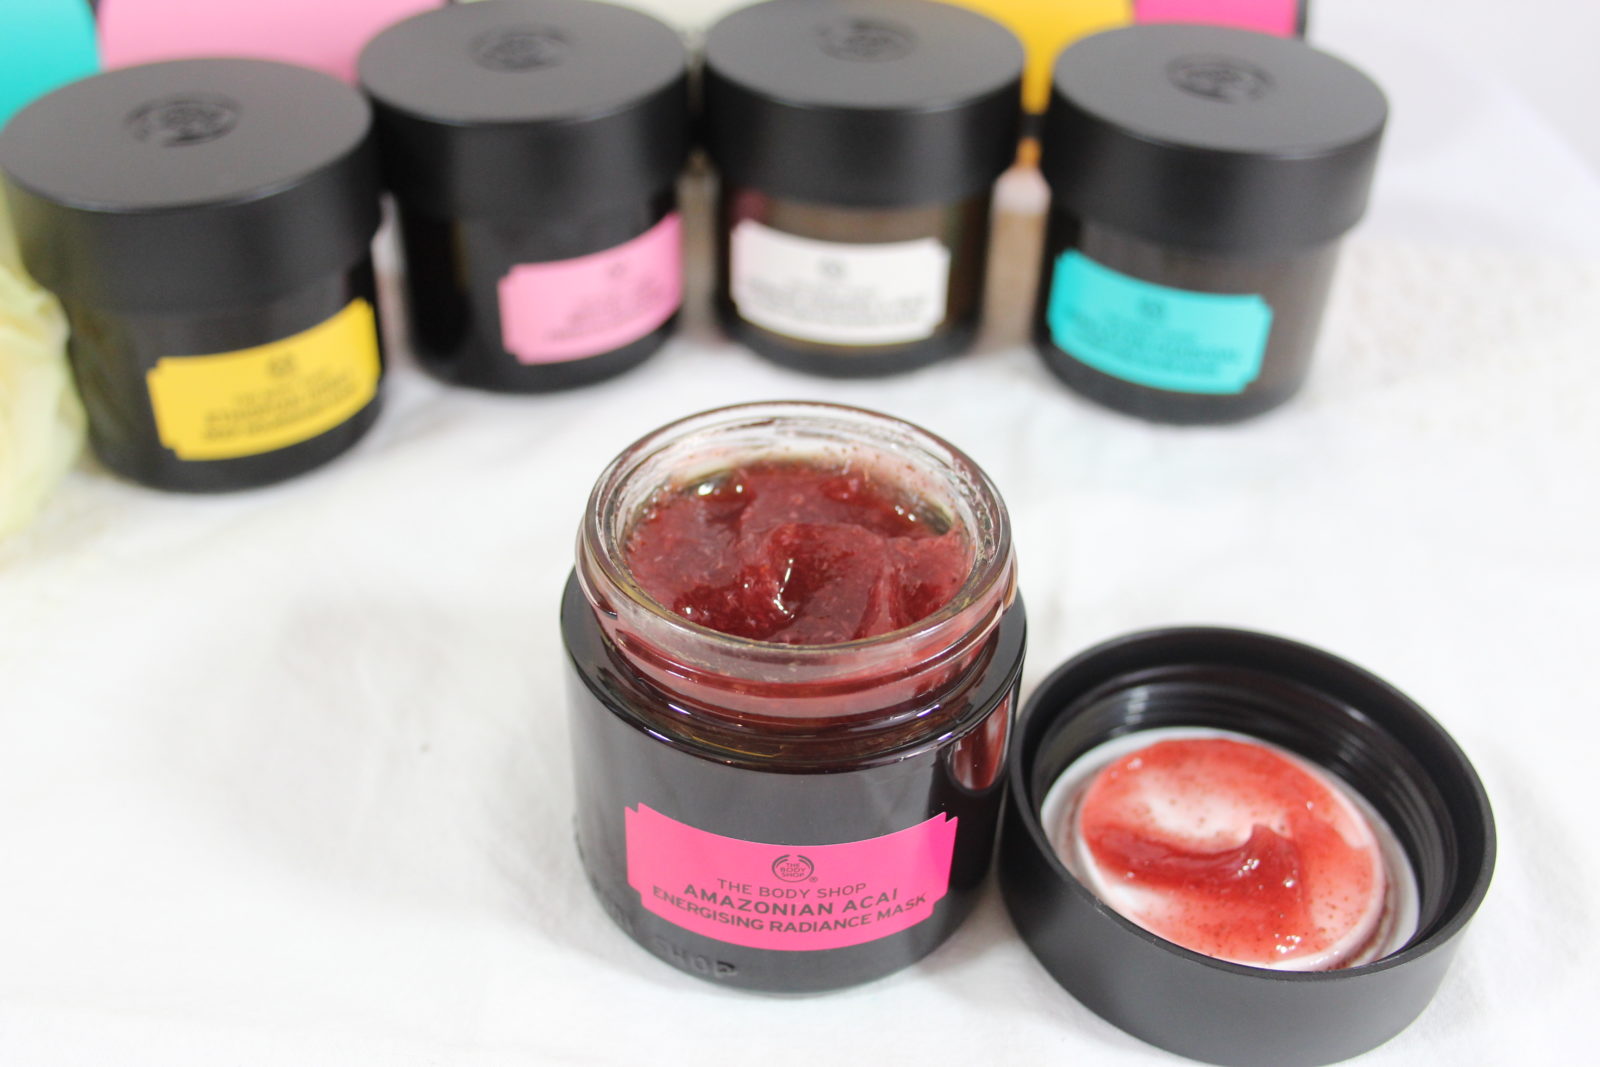 Expert Facial Masks from The Body Shop